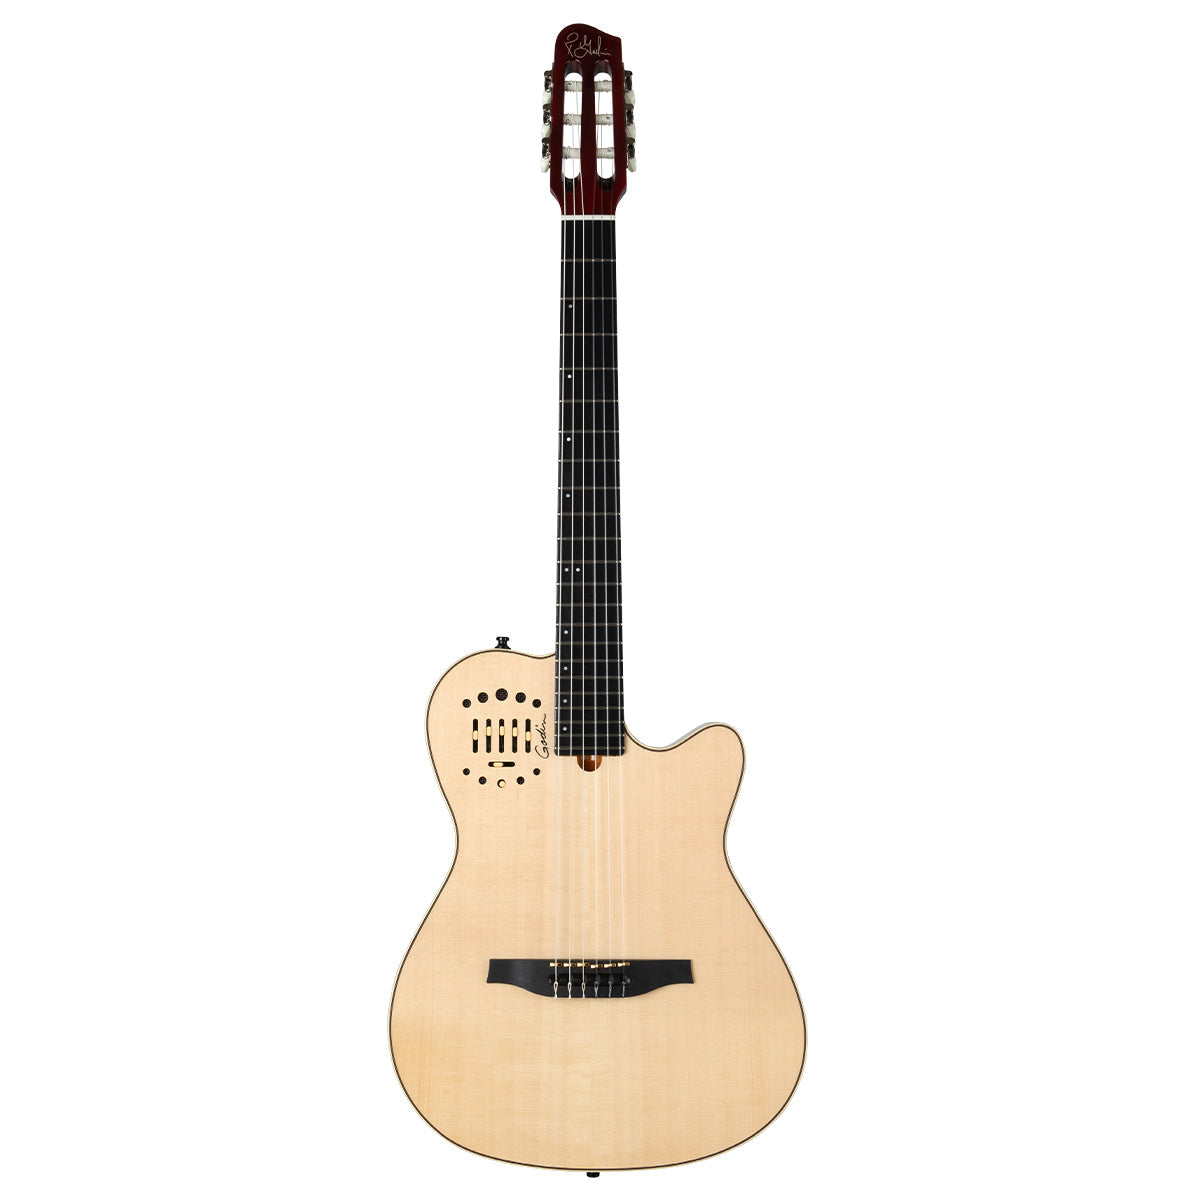 Godin Multiac Nylon Deluxe Guitar ~ Natural, Electric Guitar for sale at Richards Guitars.